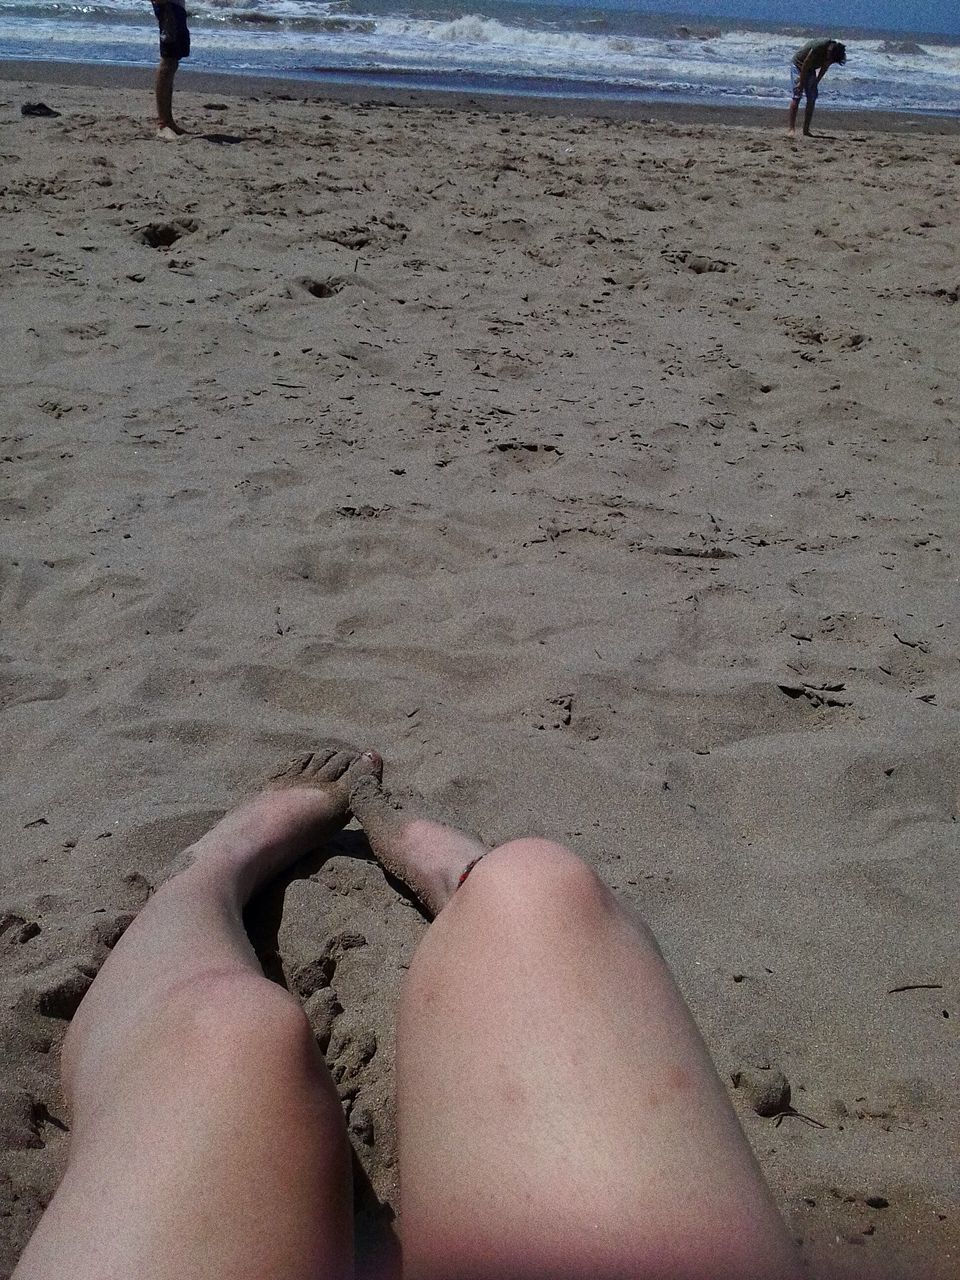 sand, human body part, beach, human leg, land, body part, low section, one person, real people, personal perspective, leisure activity, lifestyles, barefoot, nature, women, day, adult, incidental people, high angle view, human foot, outdoors, human limb